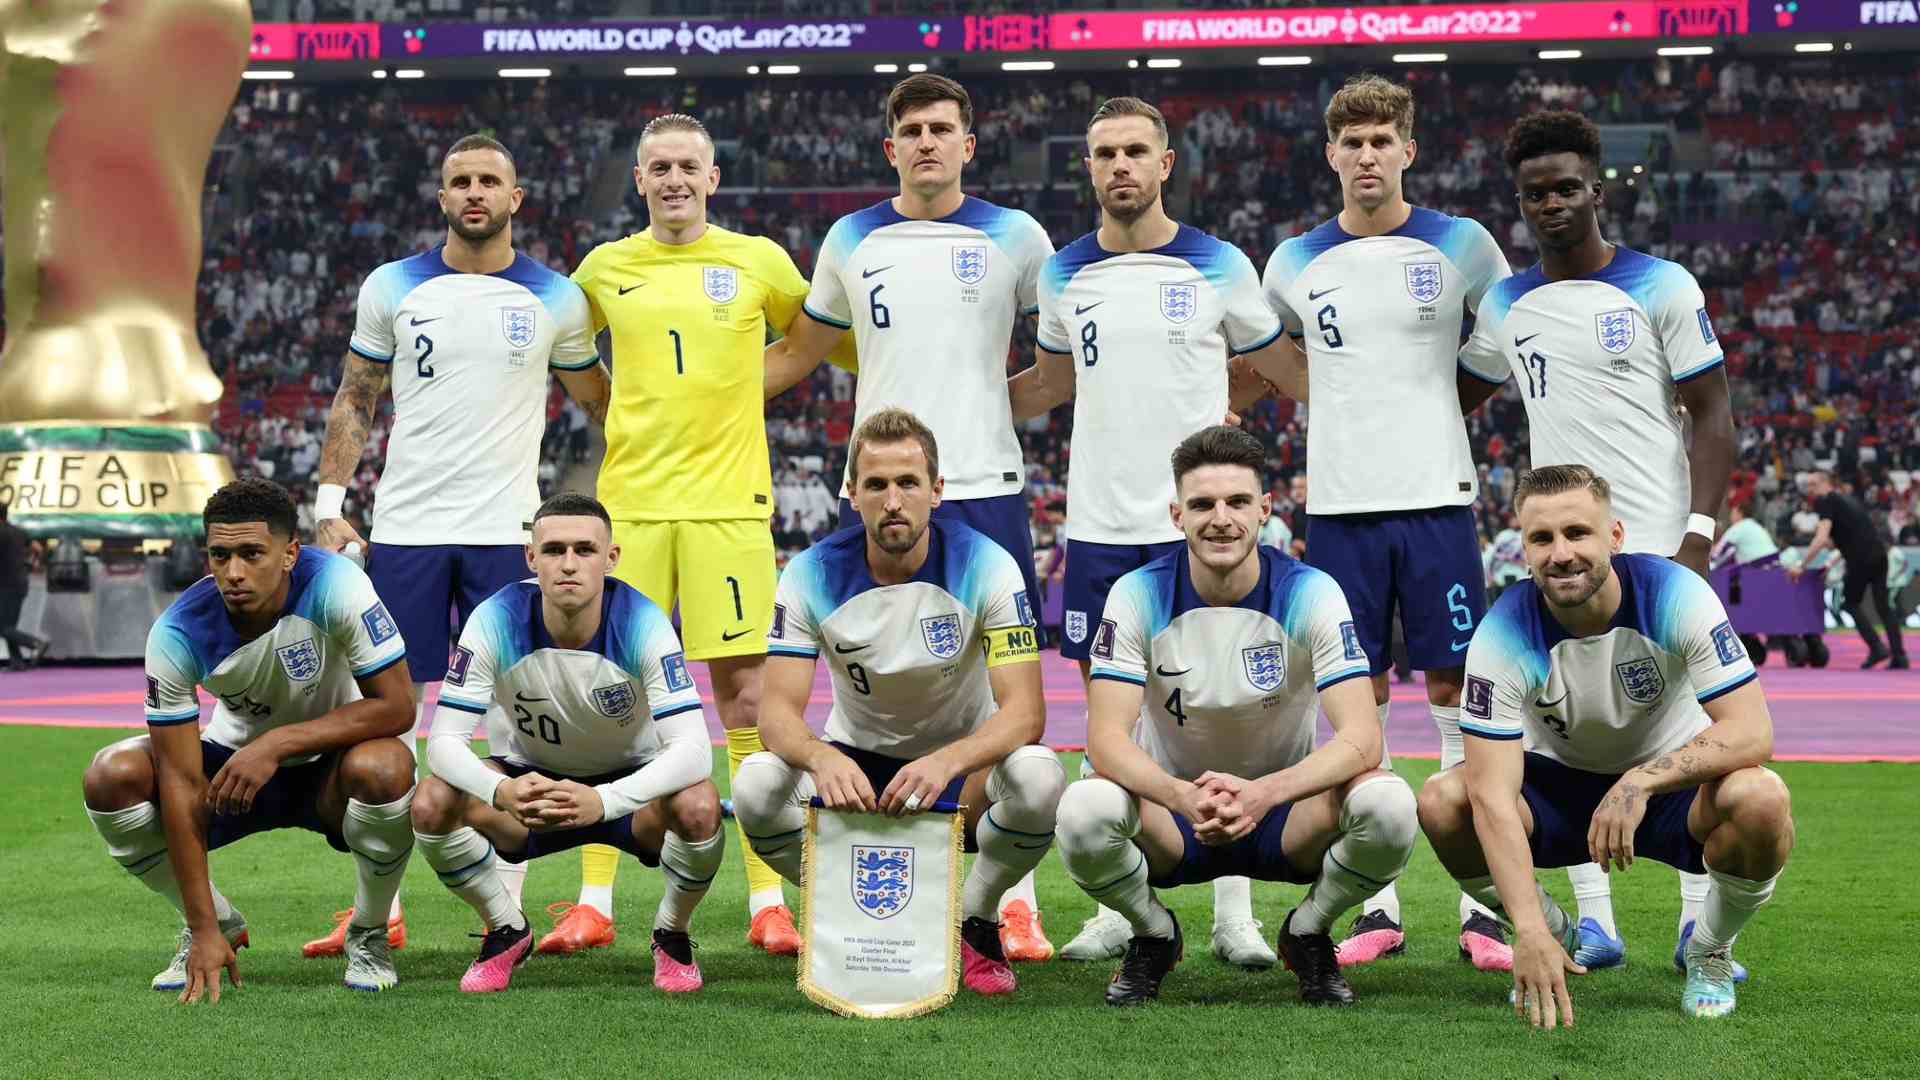 It's Not Coming Home! England Crash Out of the World Cup Against France